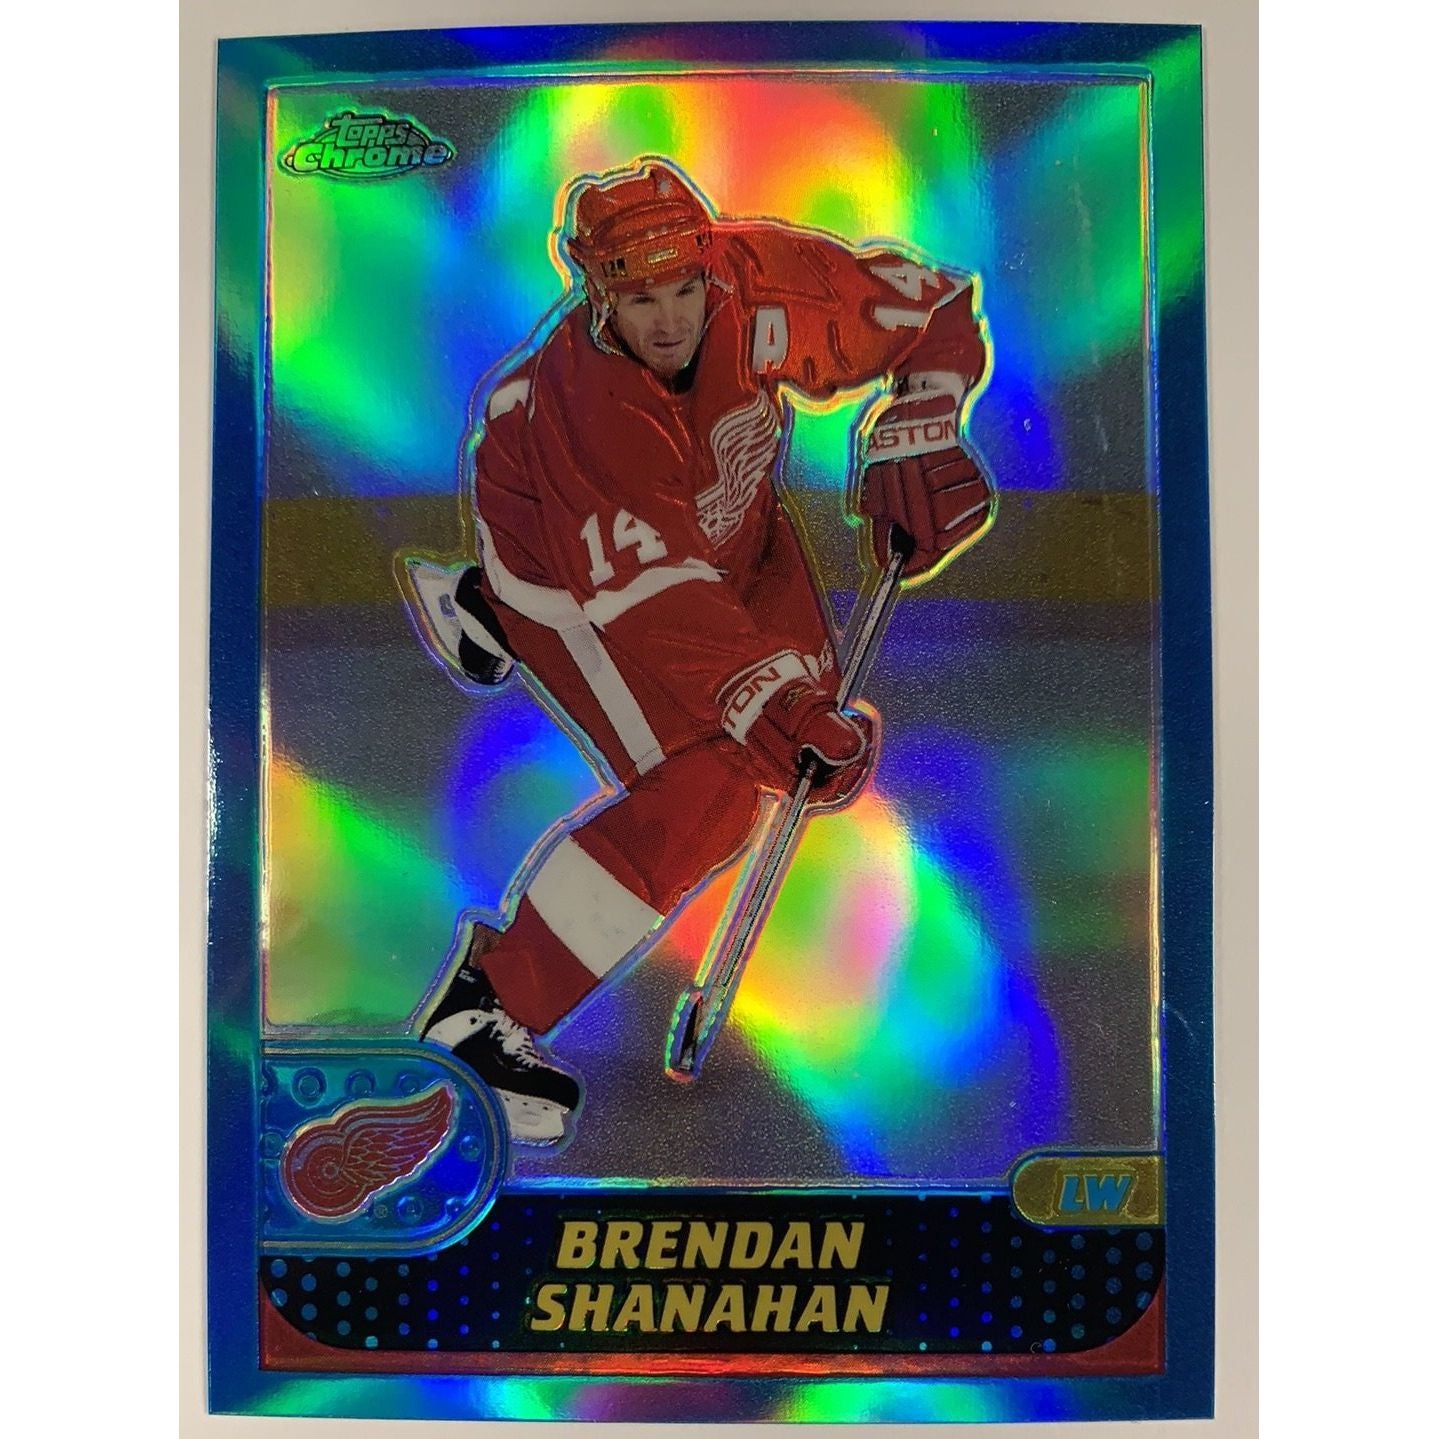  2002 Topps Chrome Brendan Shanahan Refractor  Local Legends Cards & Collectibles